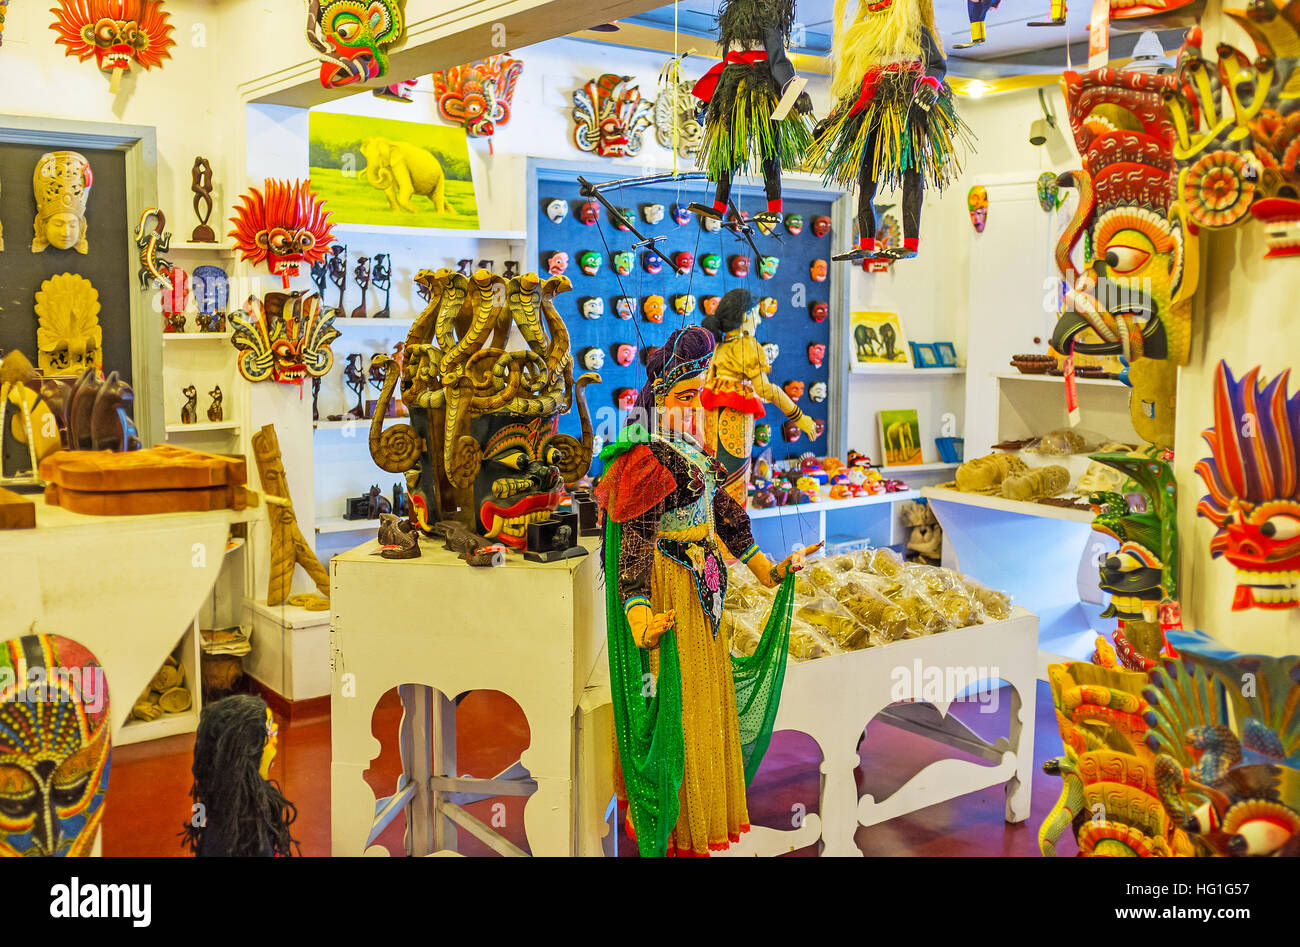 The interior of the store, that offers colorful masks and traditional puppets Stock Photo